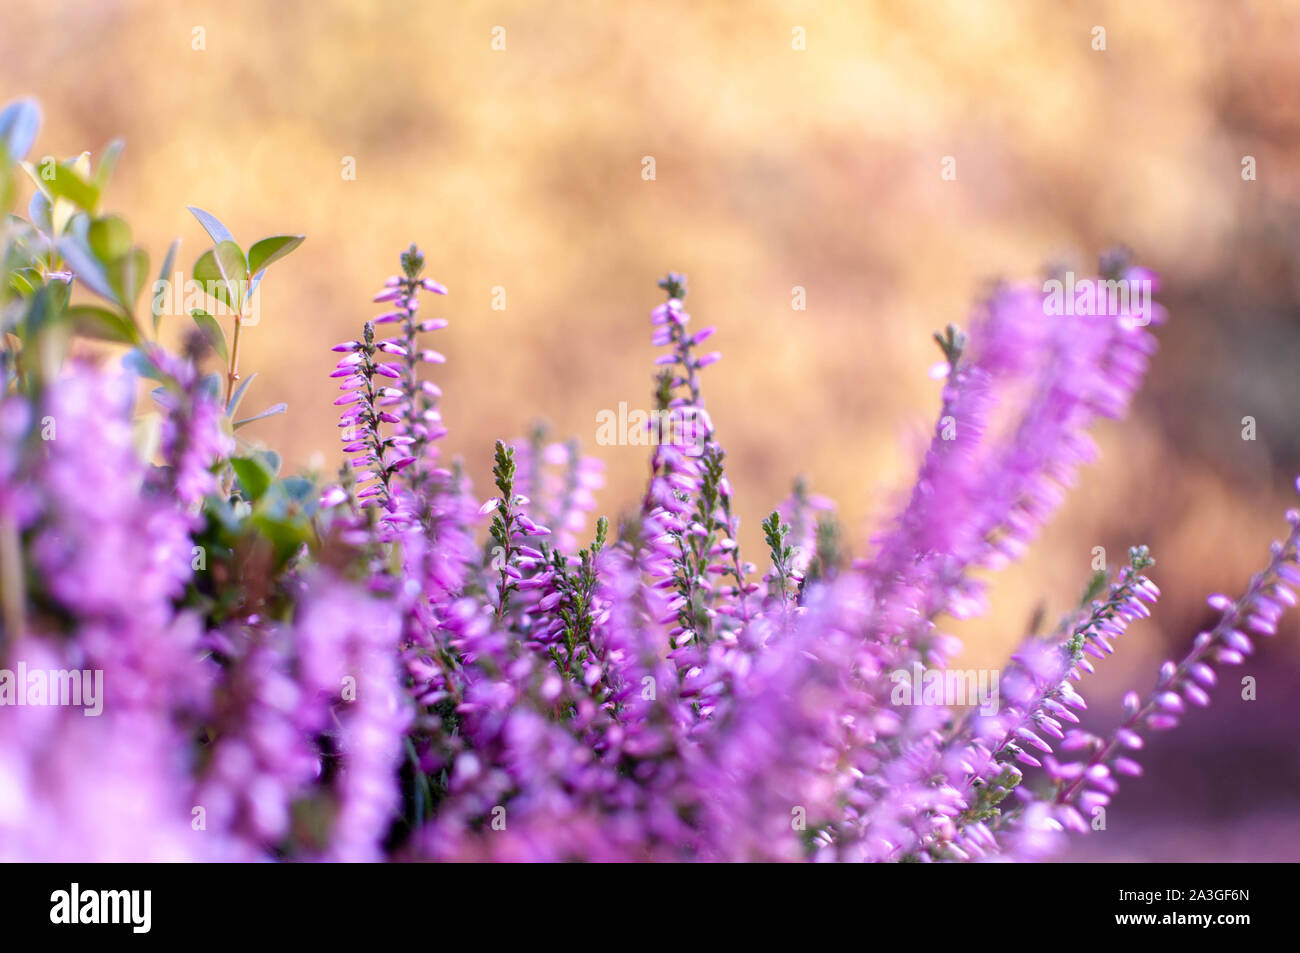 Erica plants, winter flowers in pink and purple close up. Symbol of winter cold time and holidays. Stock Photo